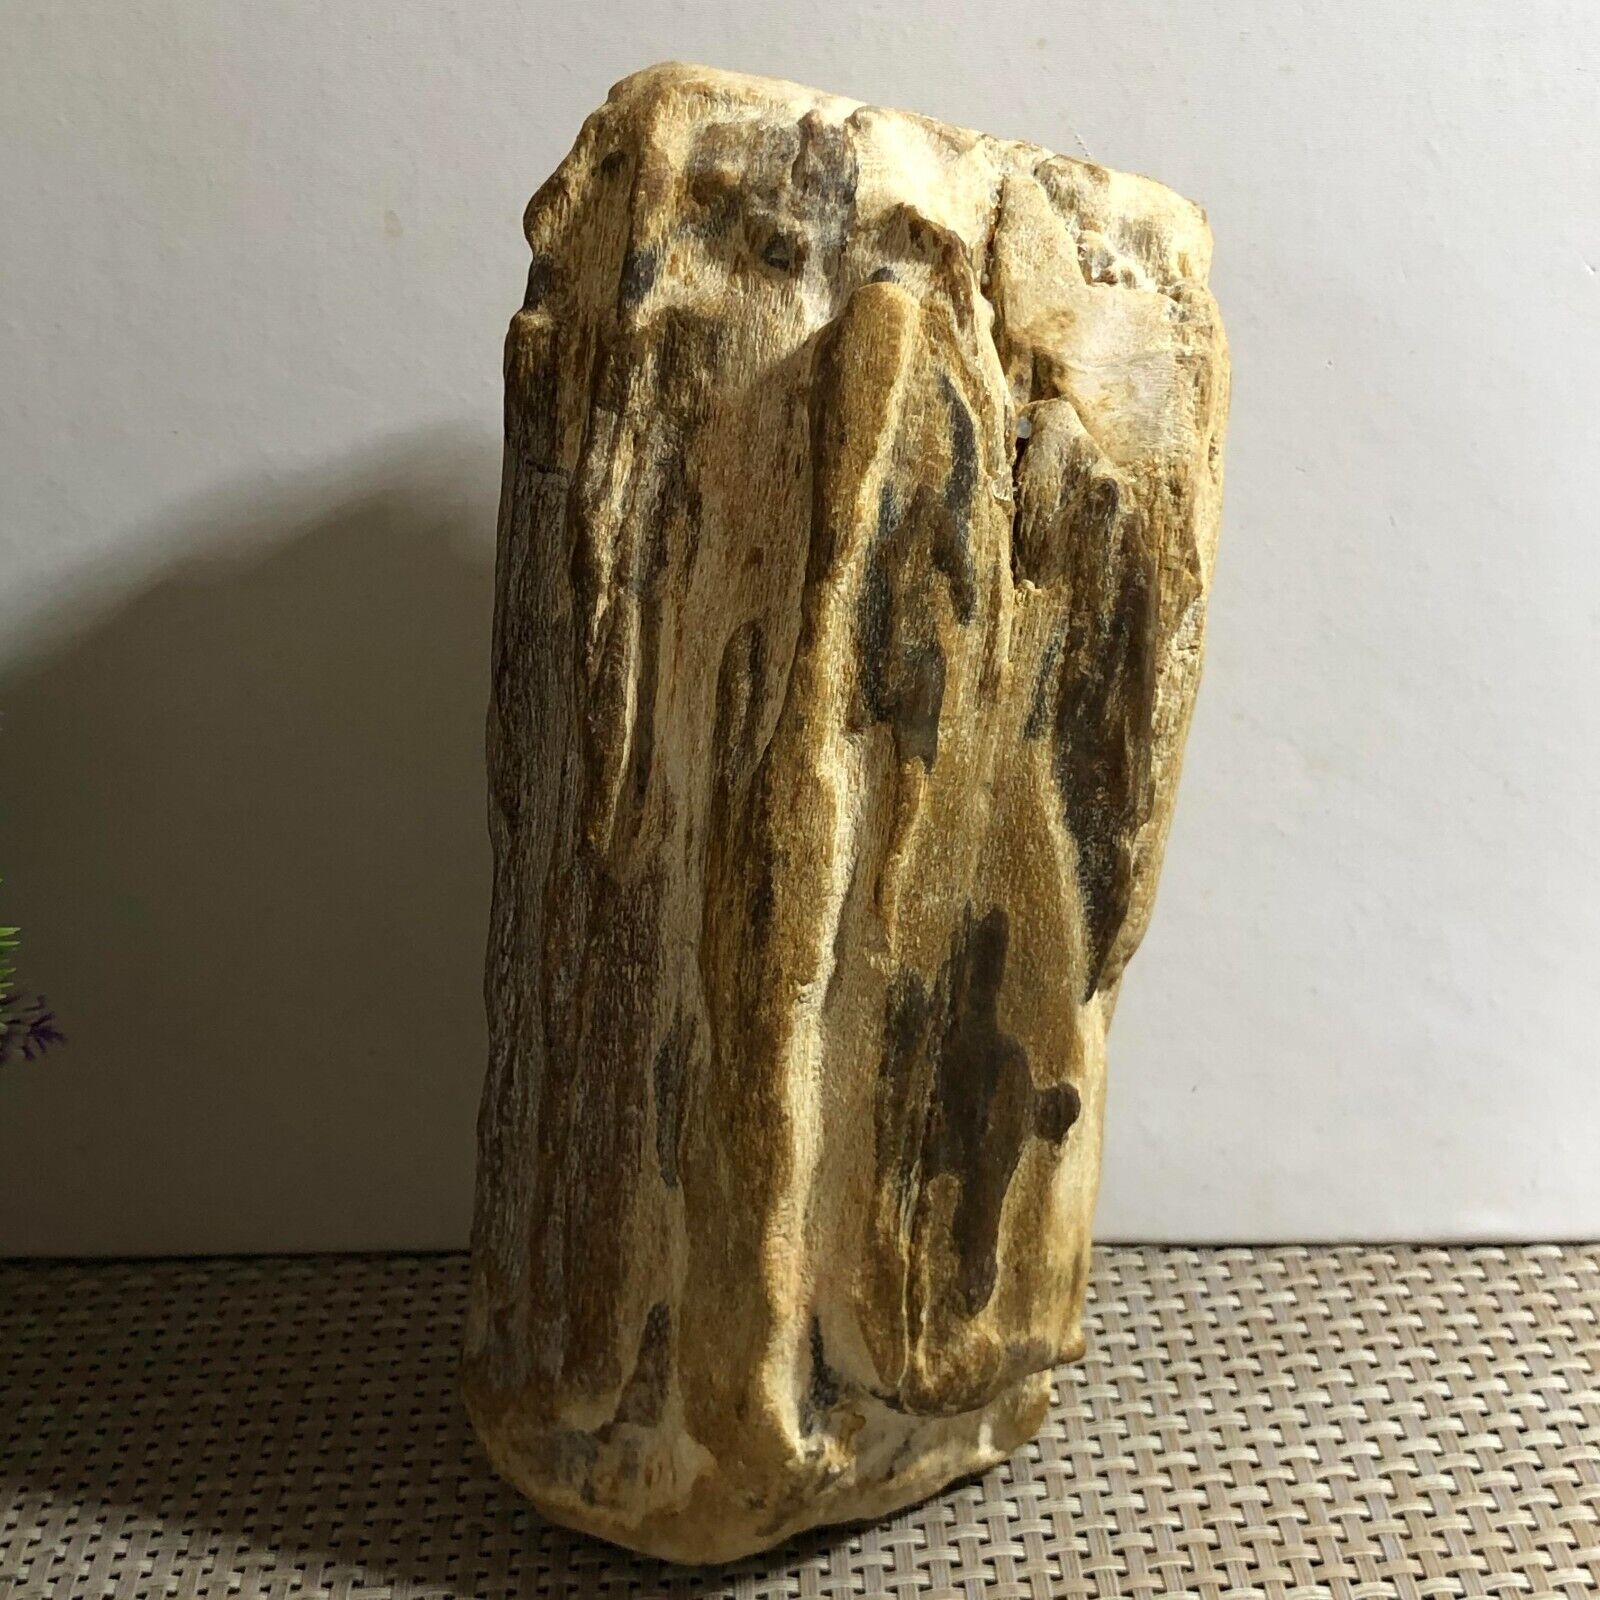 The brilliant color of Madagascar petrified wood - the brilliant South 1906g d7